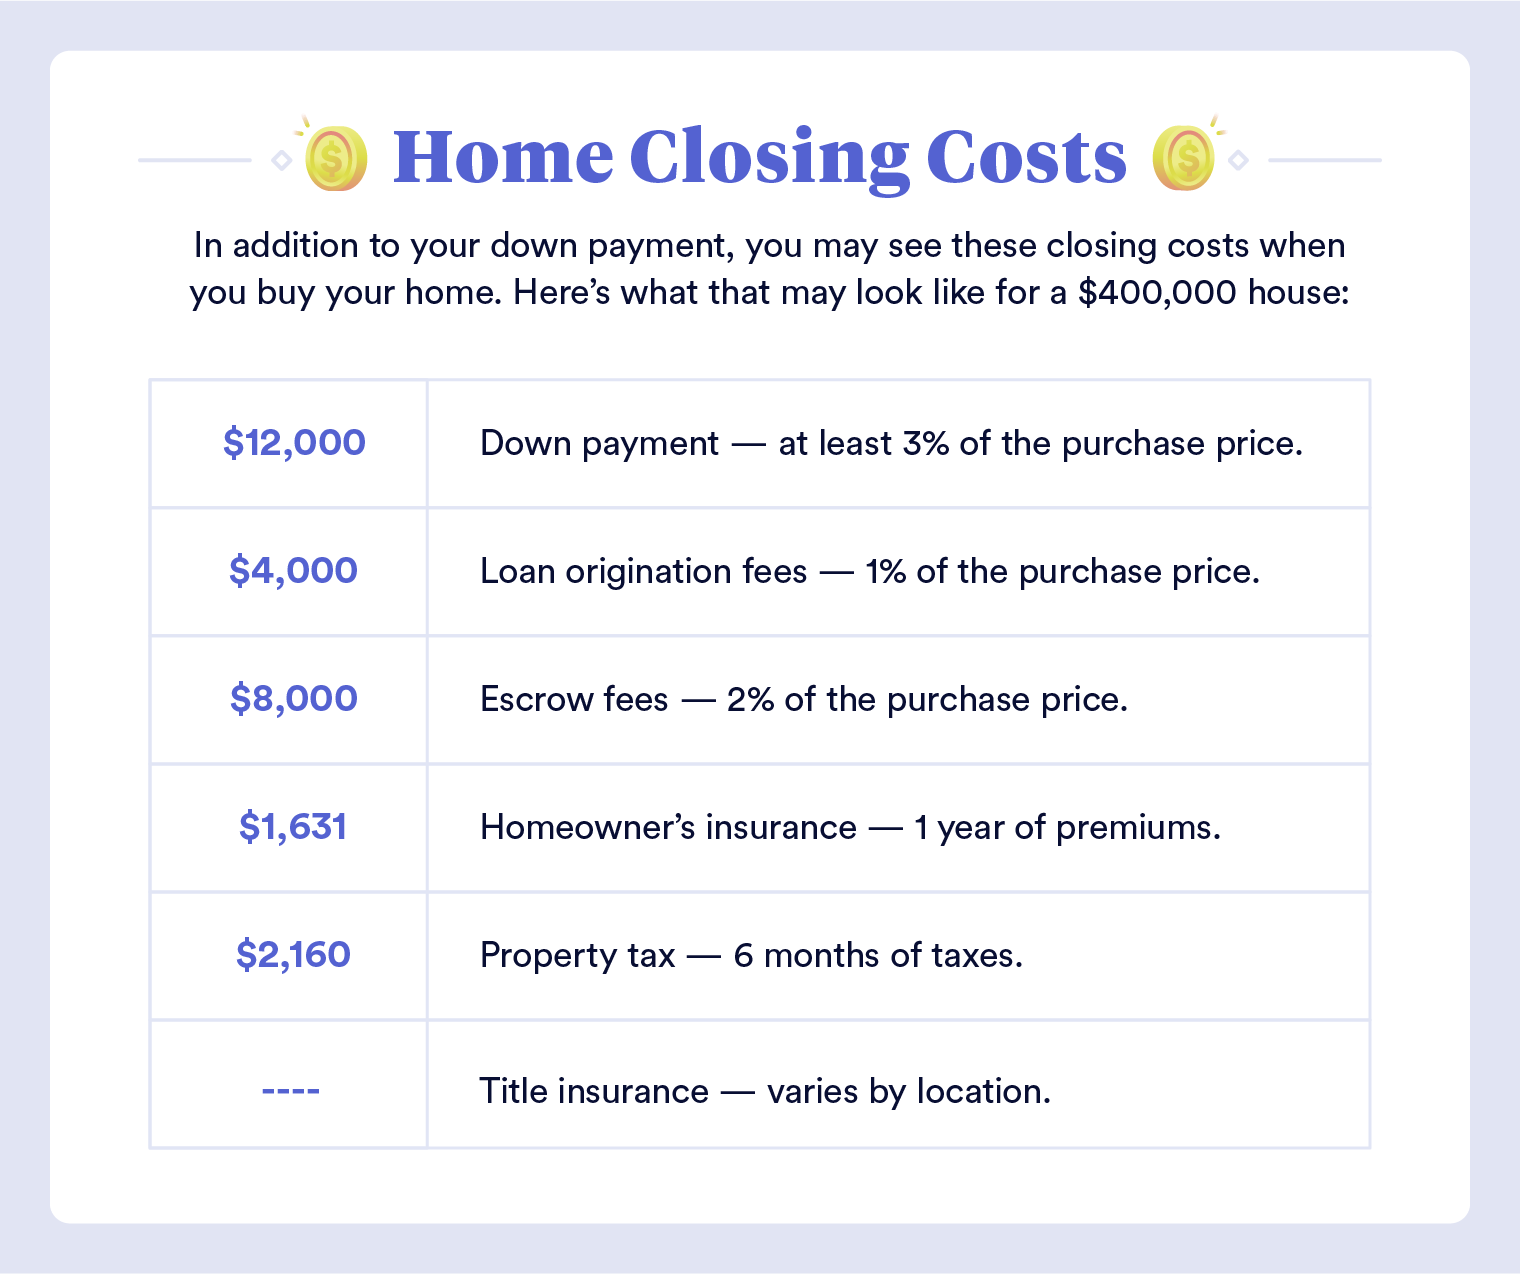 Graphic: What kind of closing costs should first-time home buyers expect to see on their settlement statement?